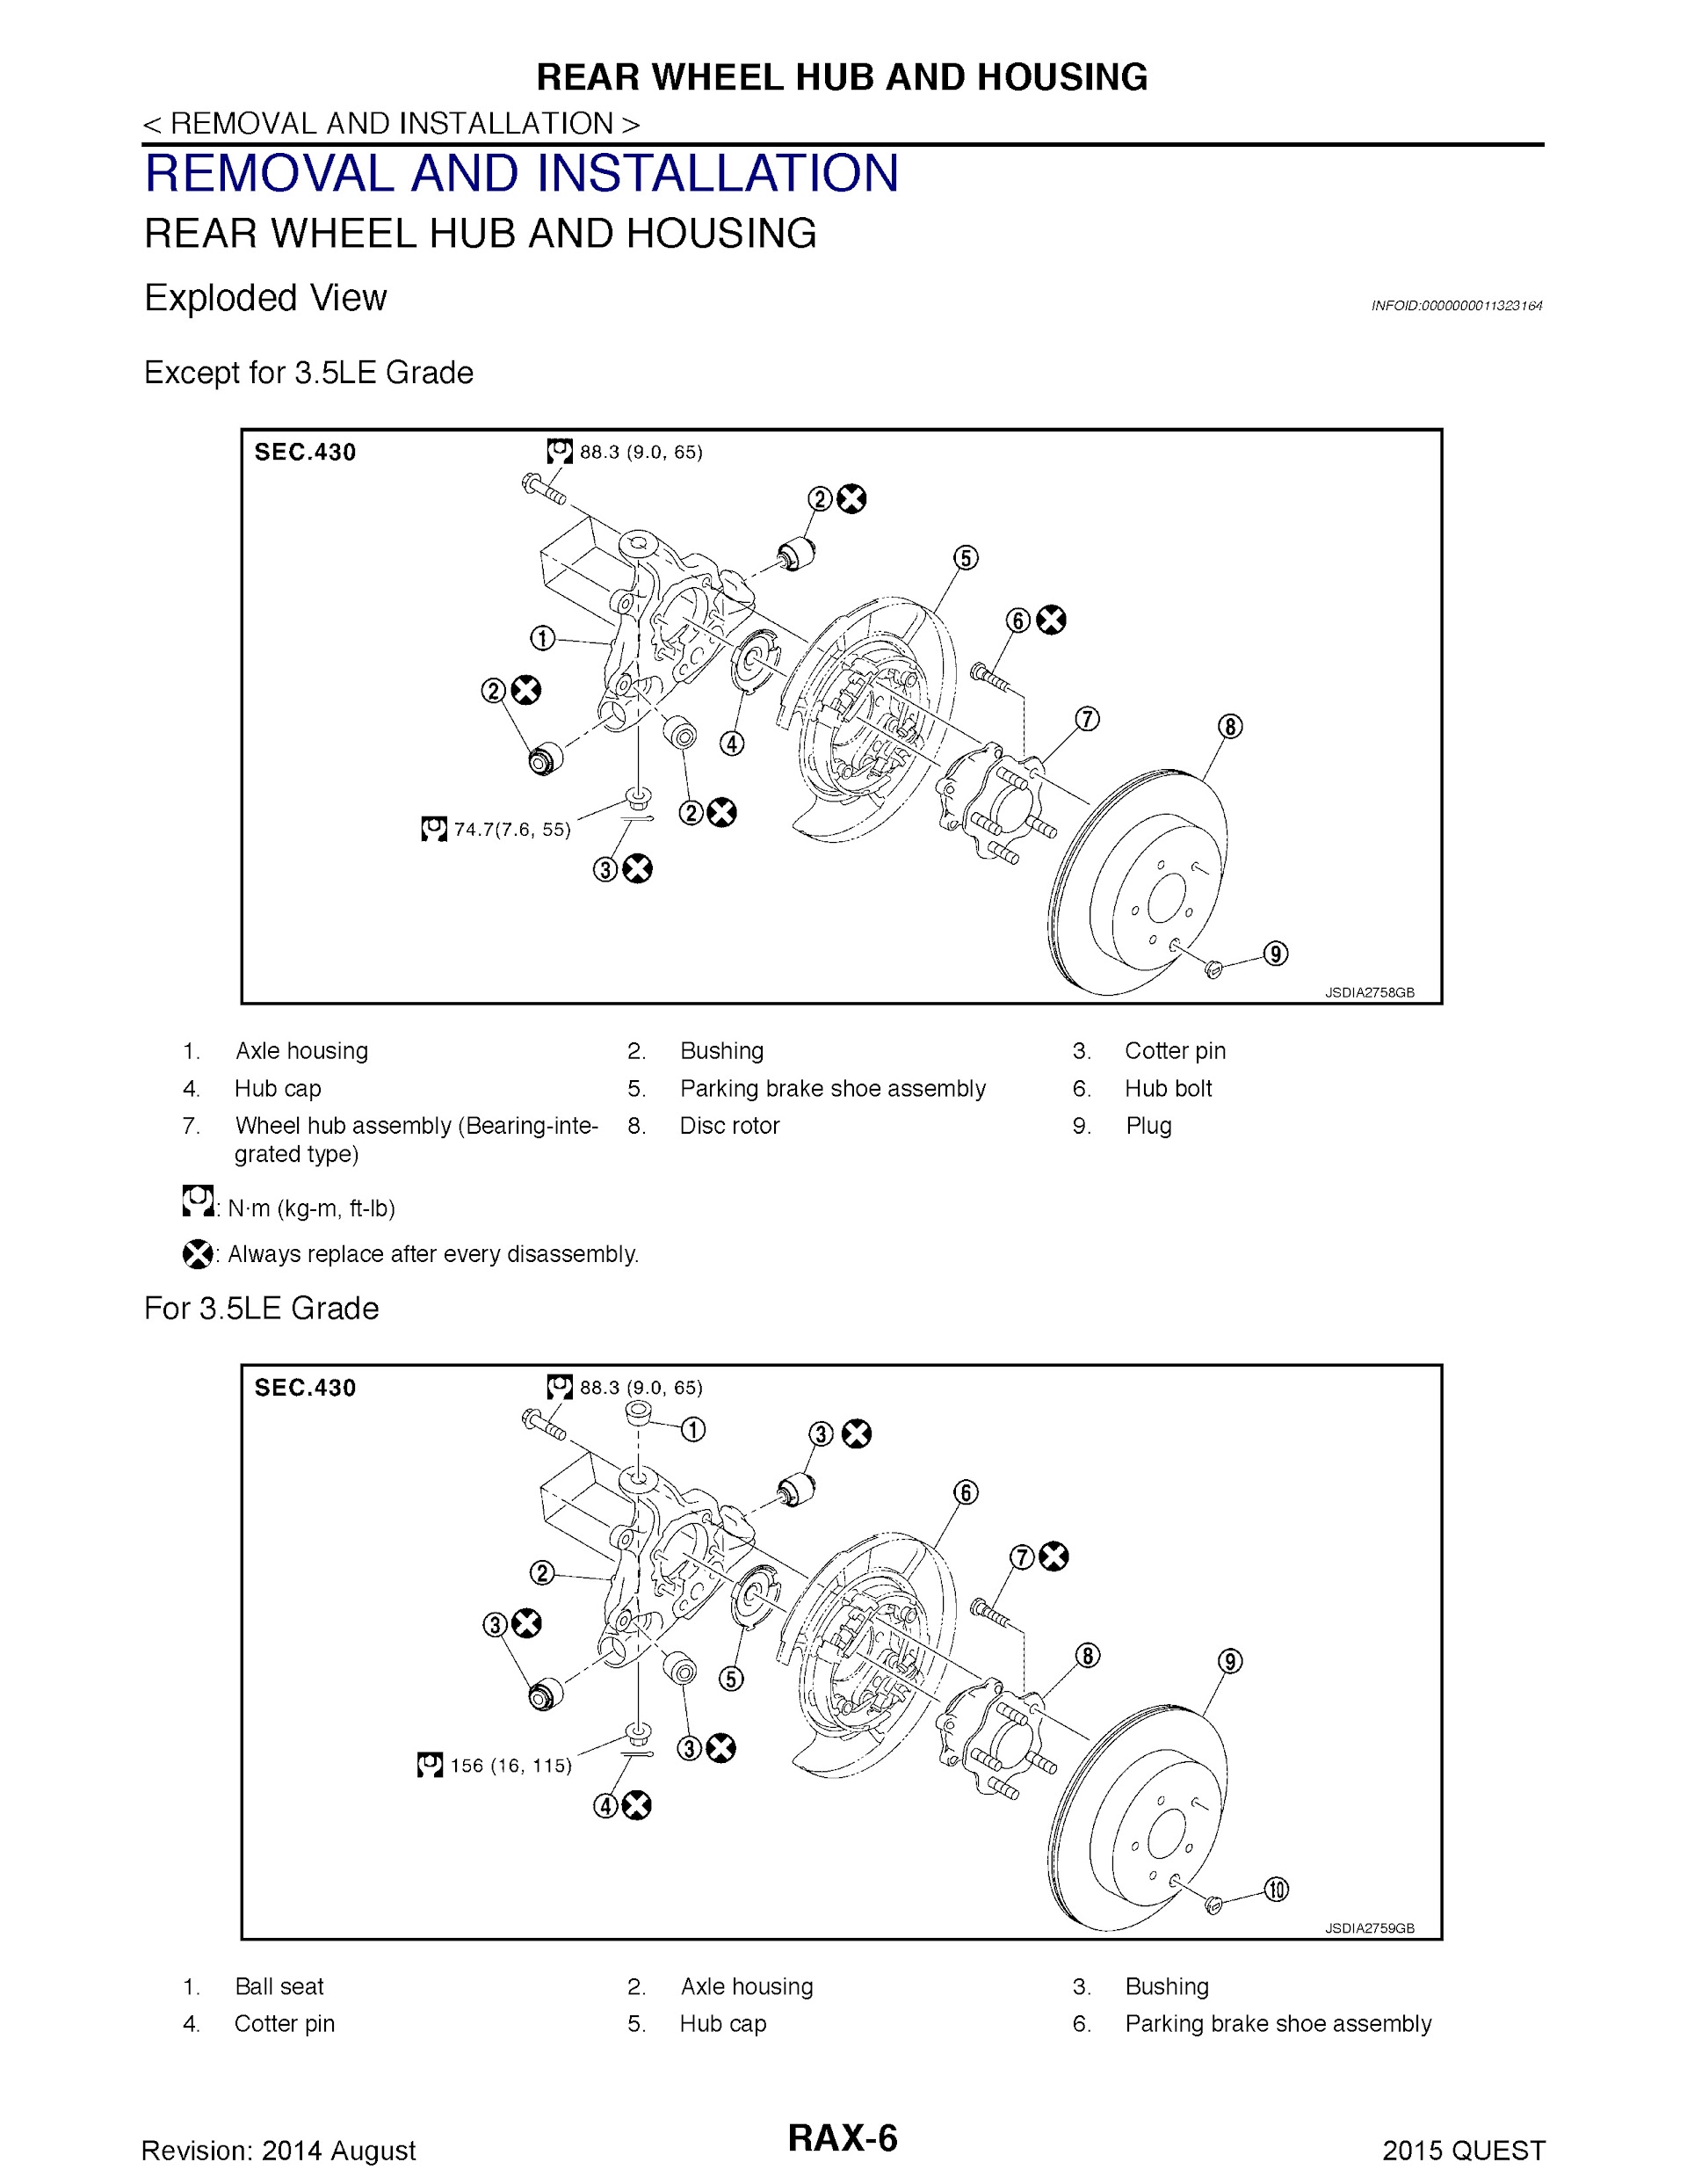 2015 Nissan Quest Repair Manual, Rear Wheel Hub and Housing Removal and Installation